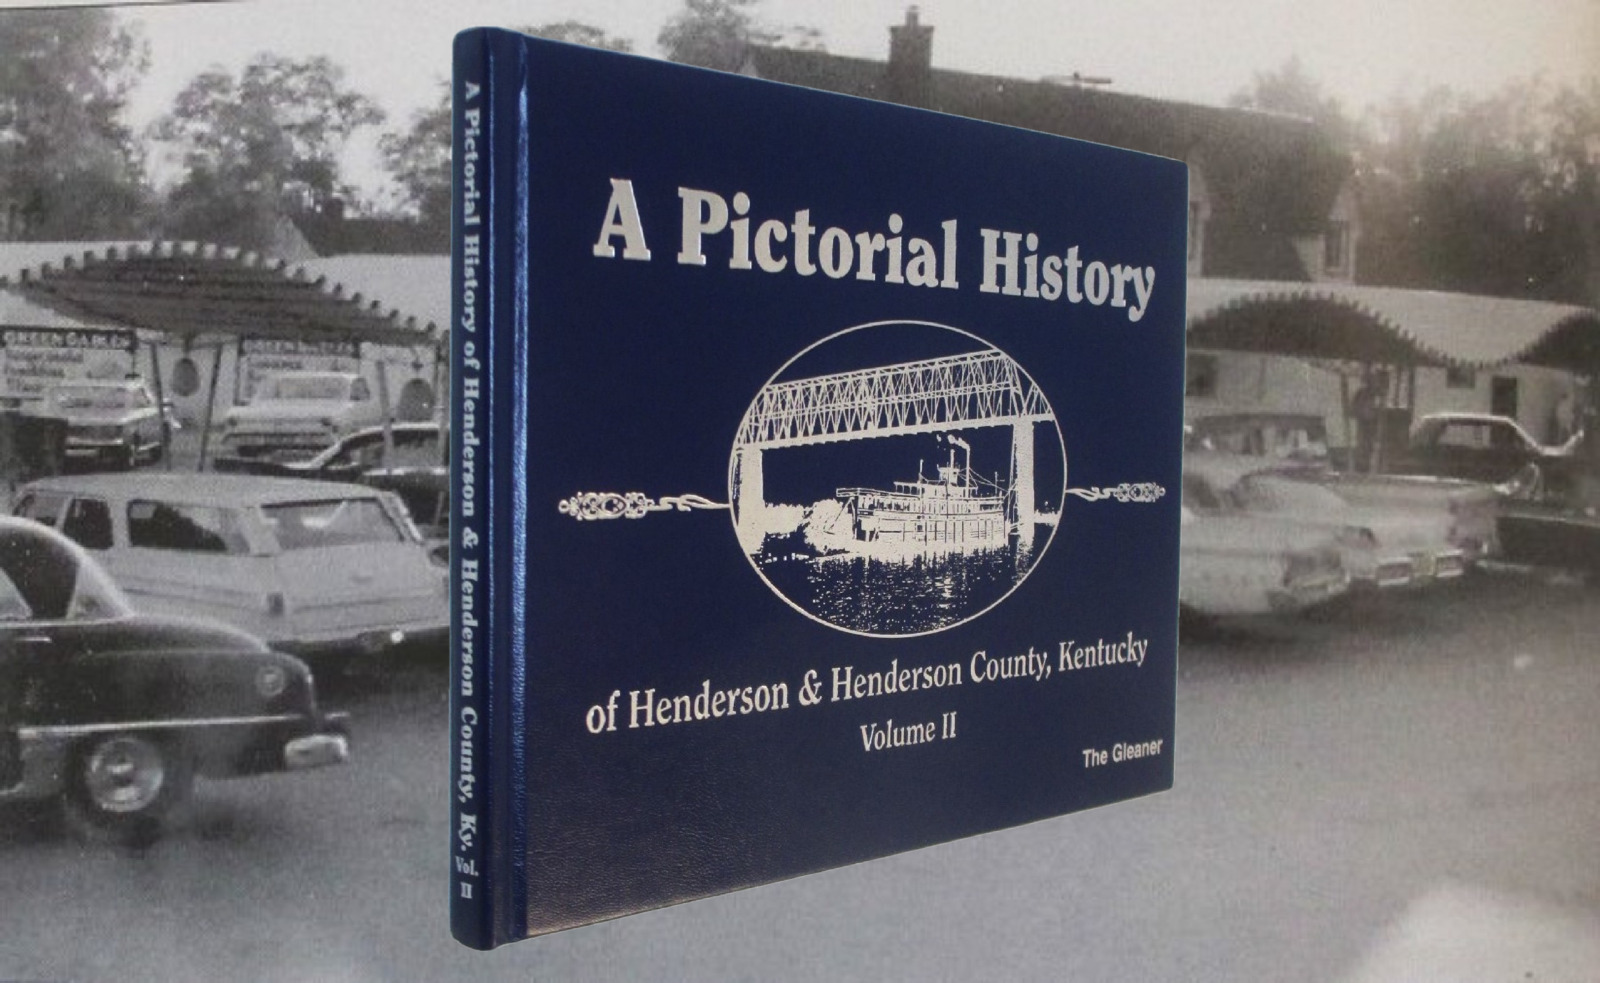 A pictorial history of  Henderson & Henderson County Kentucky   Volume II